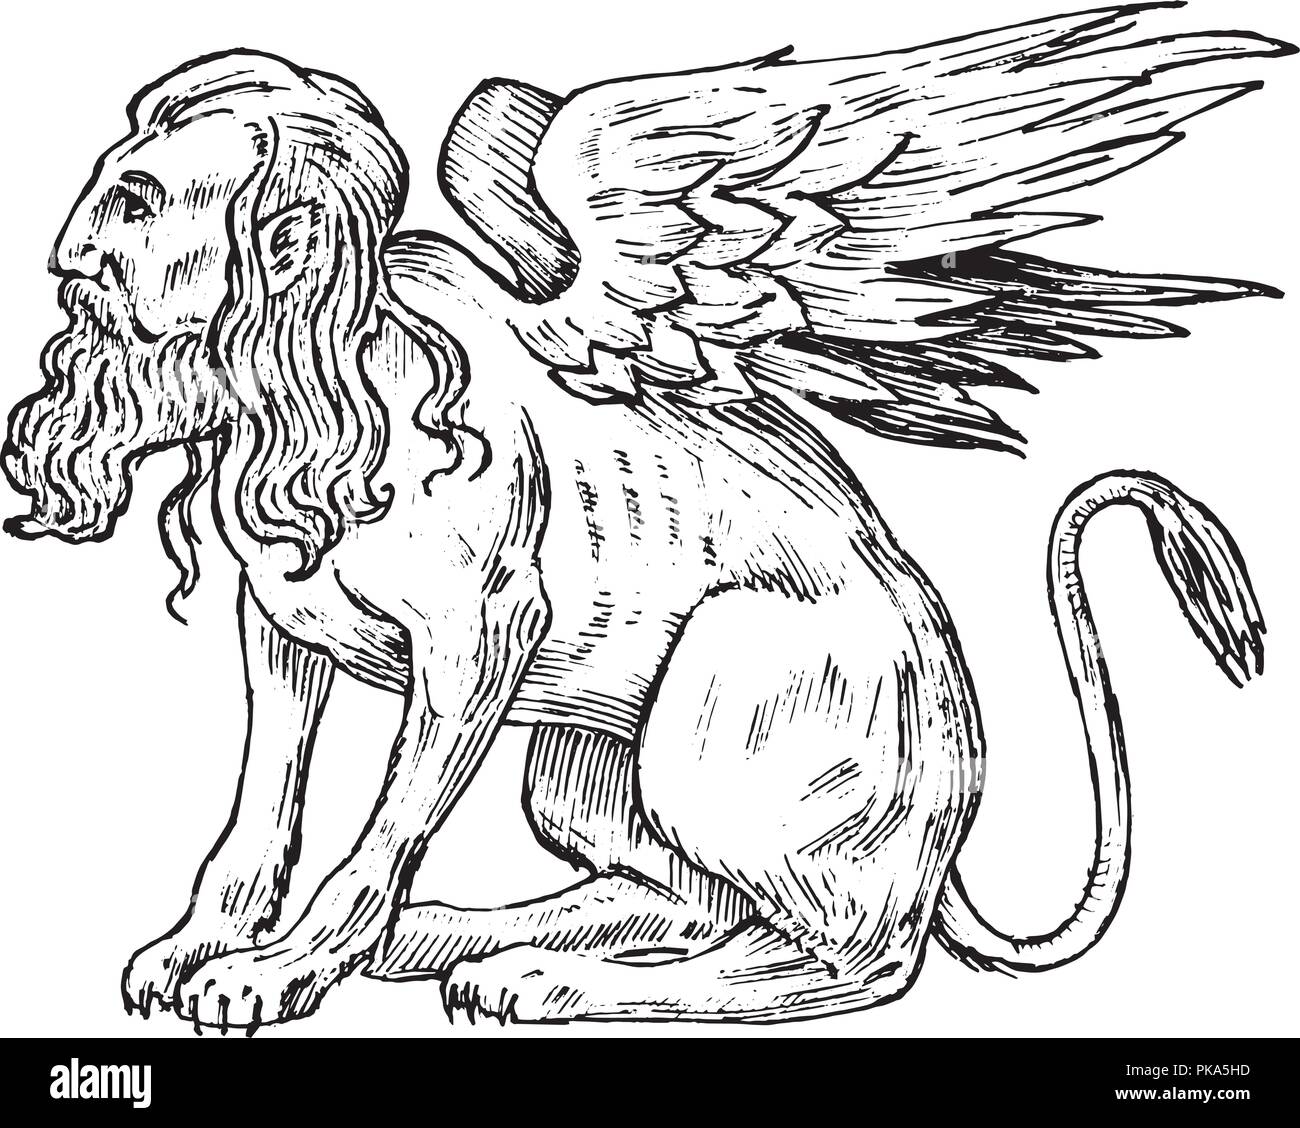 Mythological animals. Mythical Sphinx. Ancient human bird, fantastic creatures in the old vintage style. Engraved hand drawn old sketch. Stock Vector